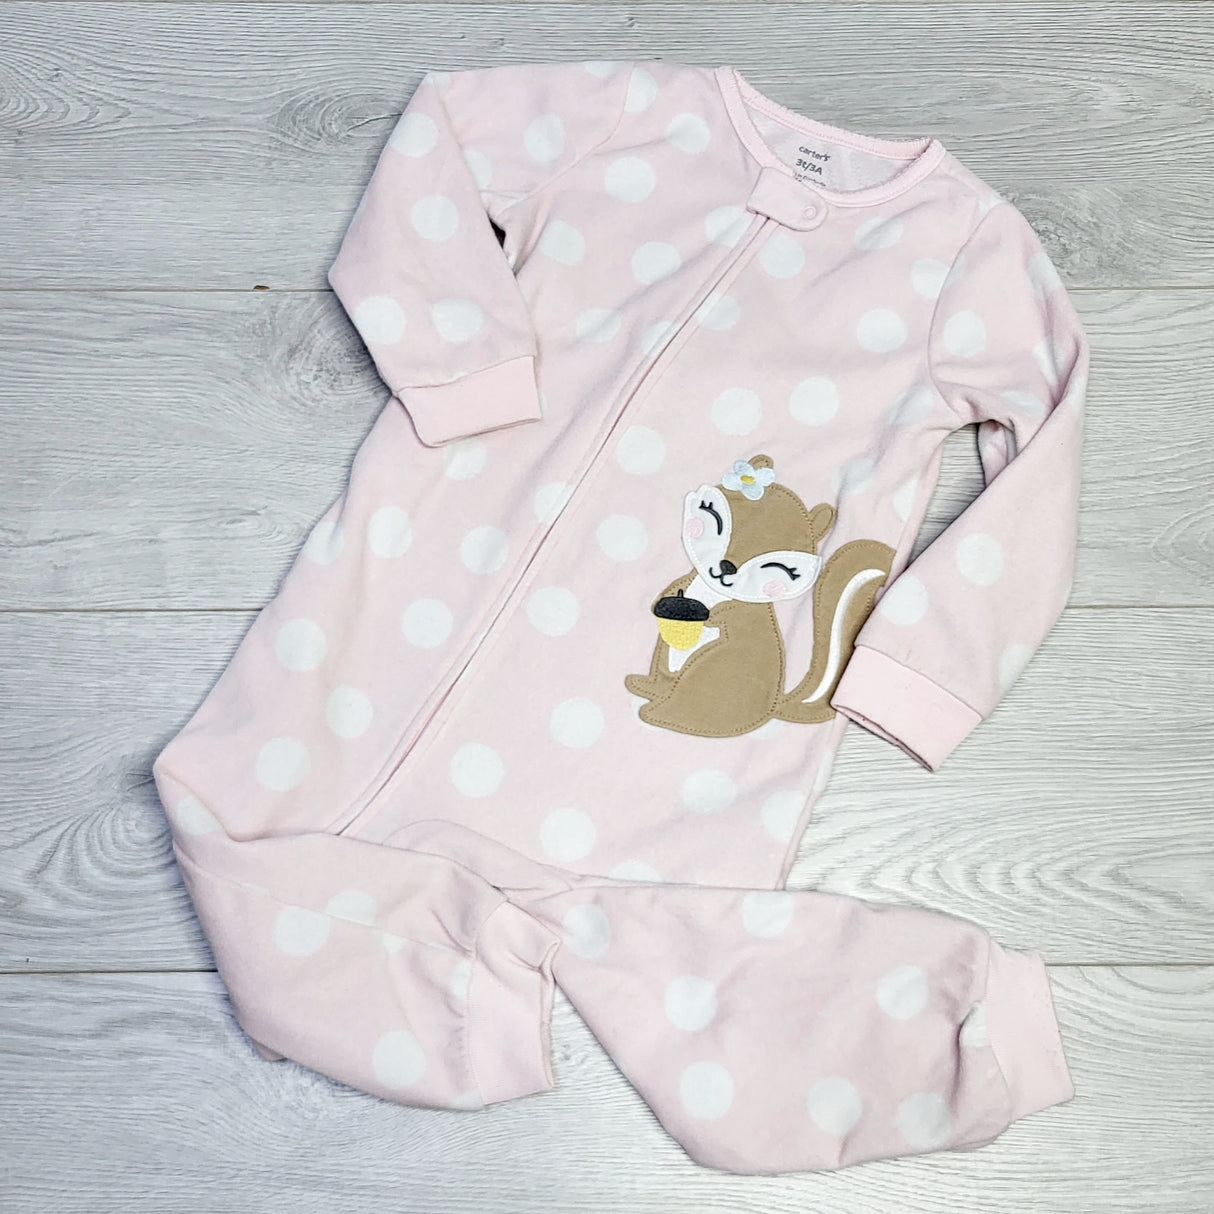 CRTH1 - Carters pink polka dot zippered fleece sleeper with squirrel. Size 3T